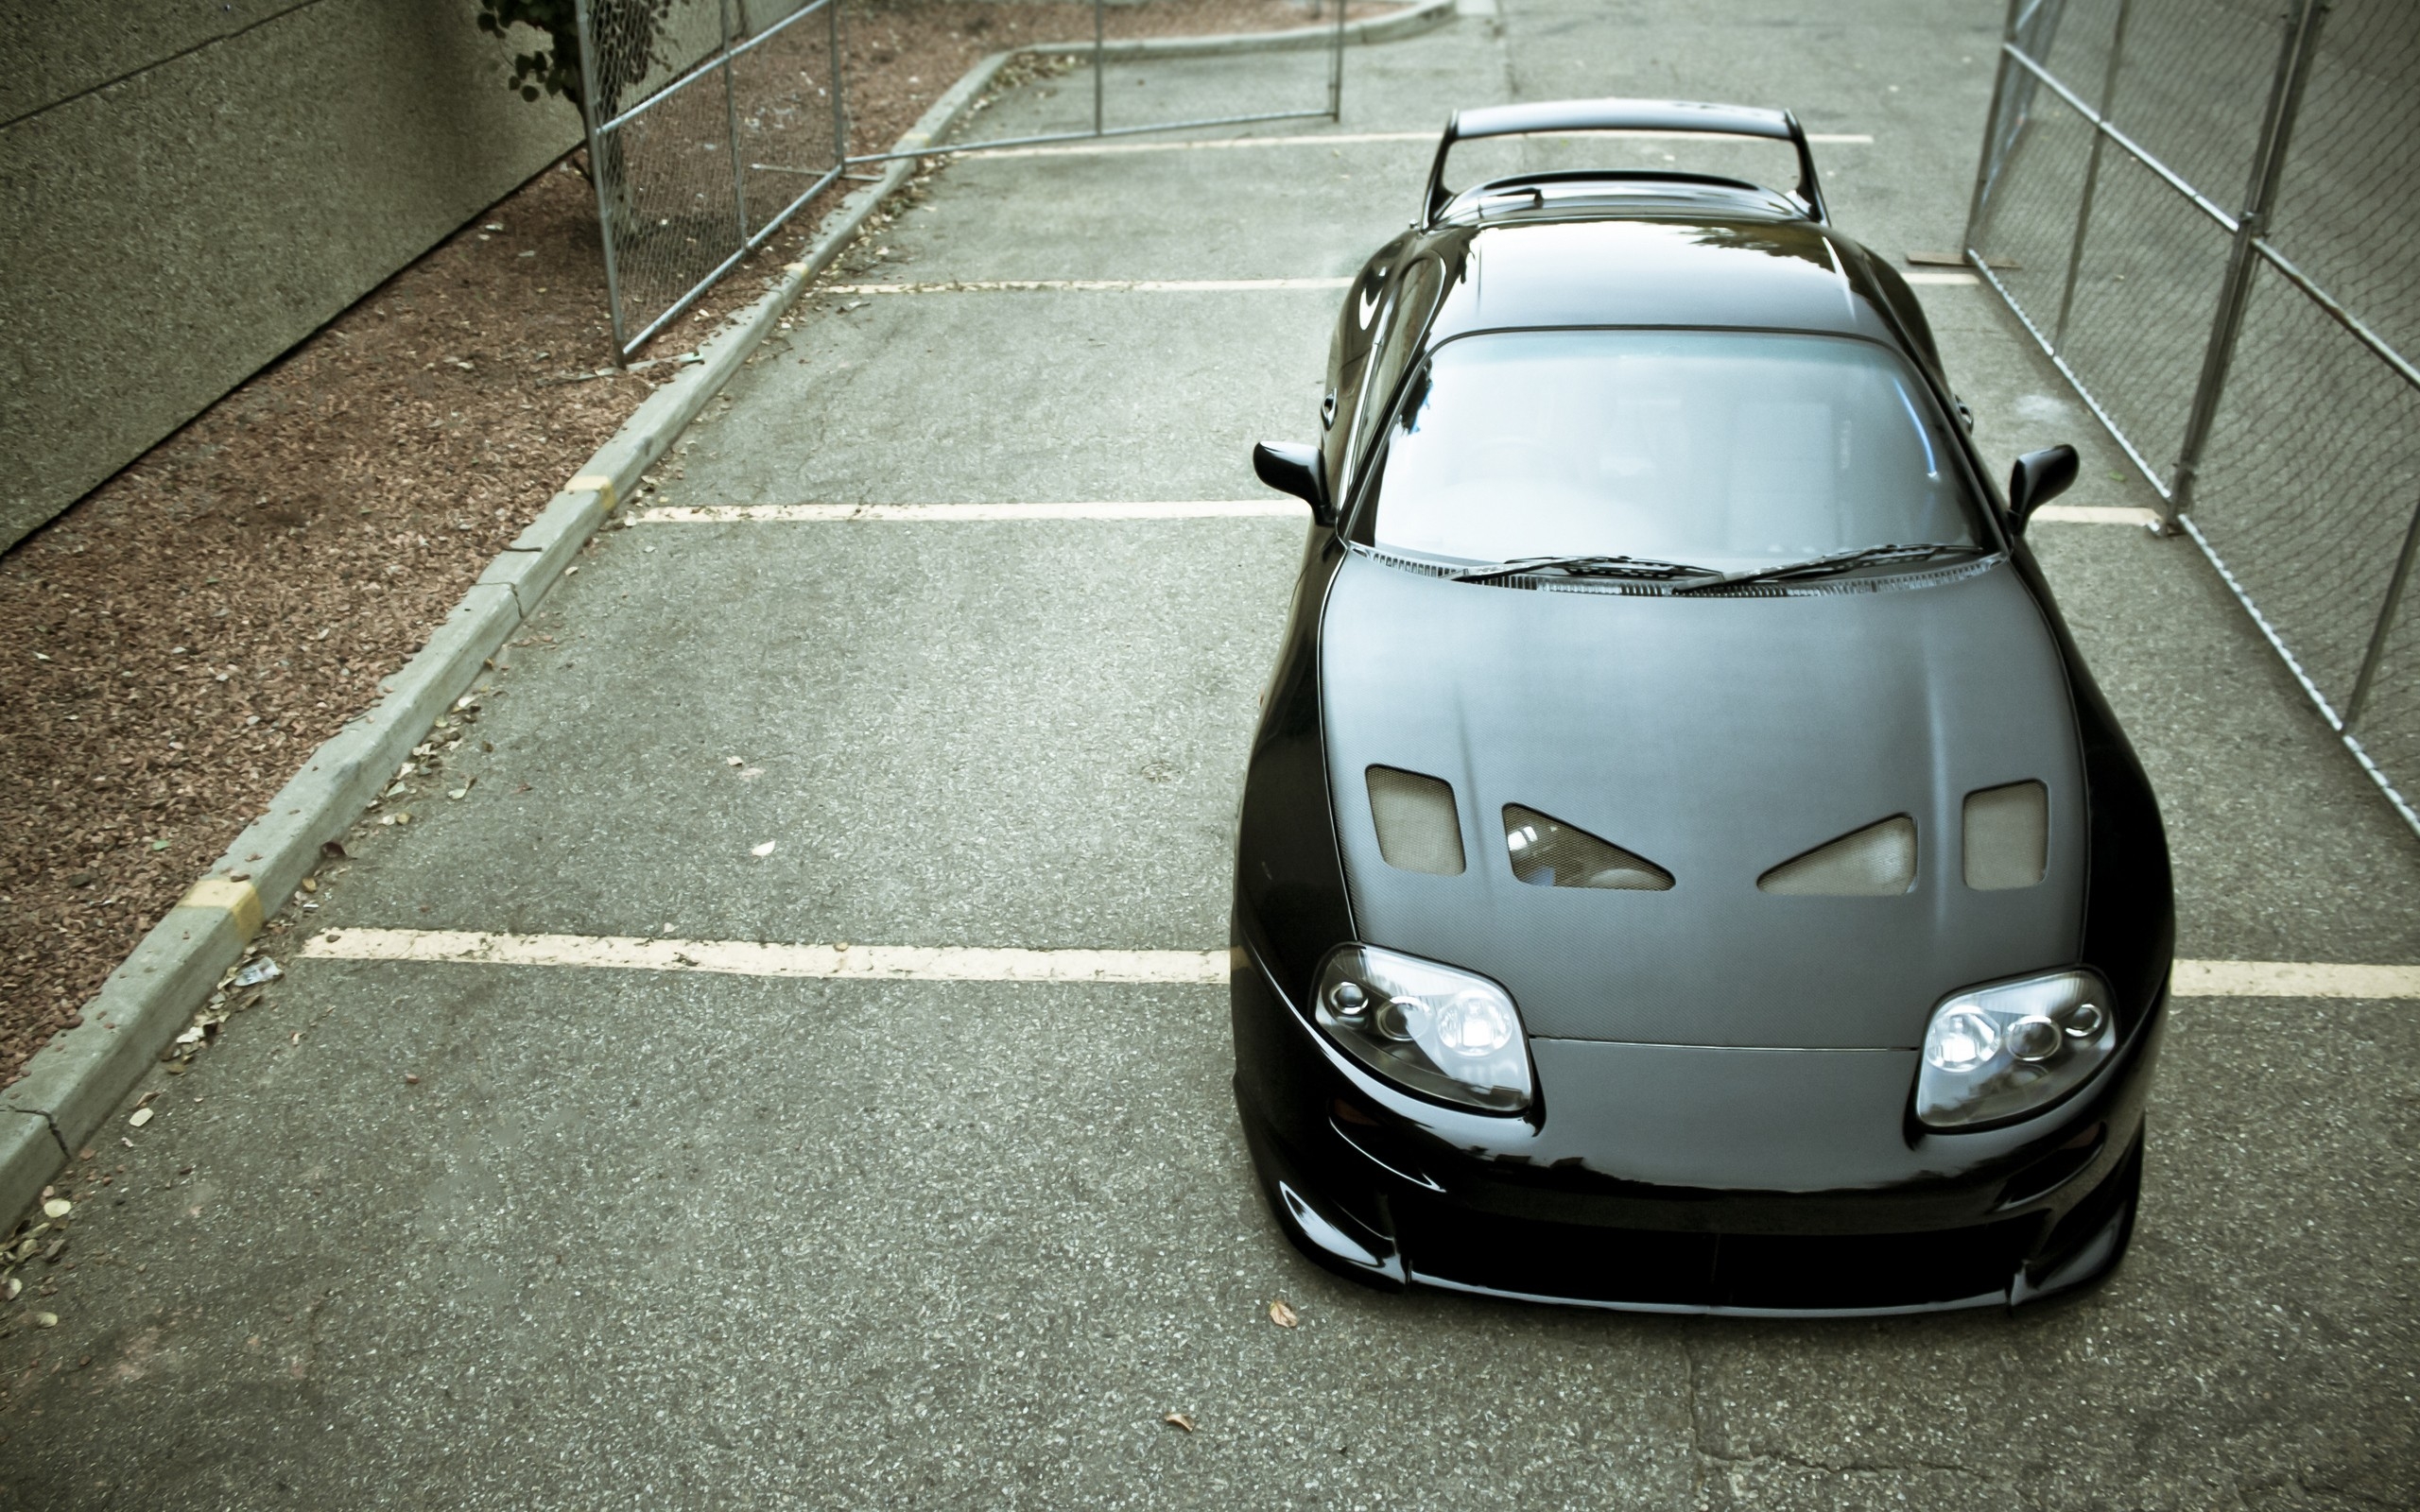 cars, Tuning, Toyota, Supra, In, A, Parking, Lot Wallpaper